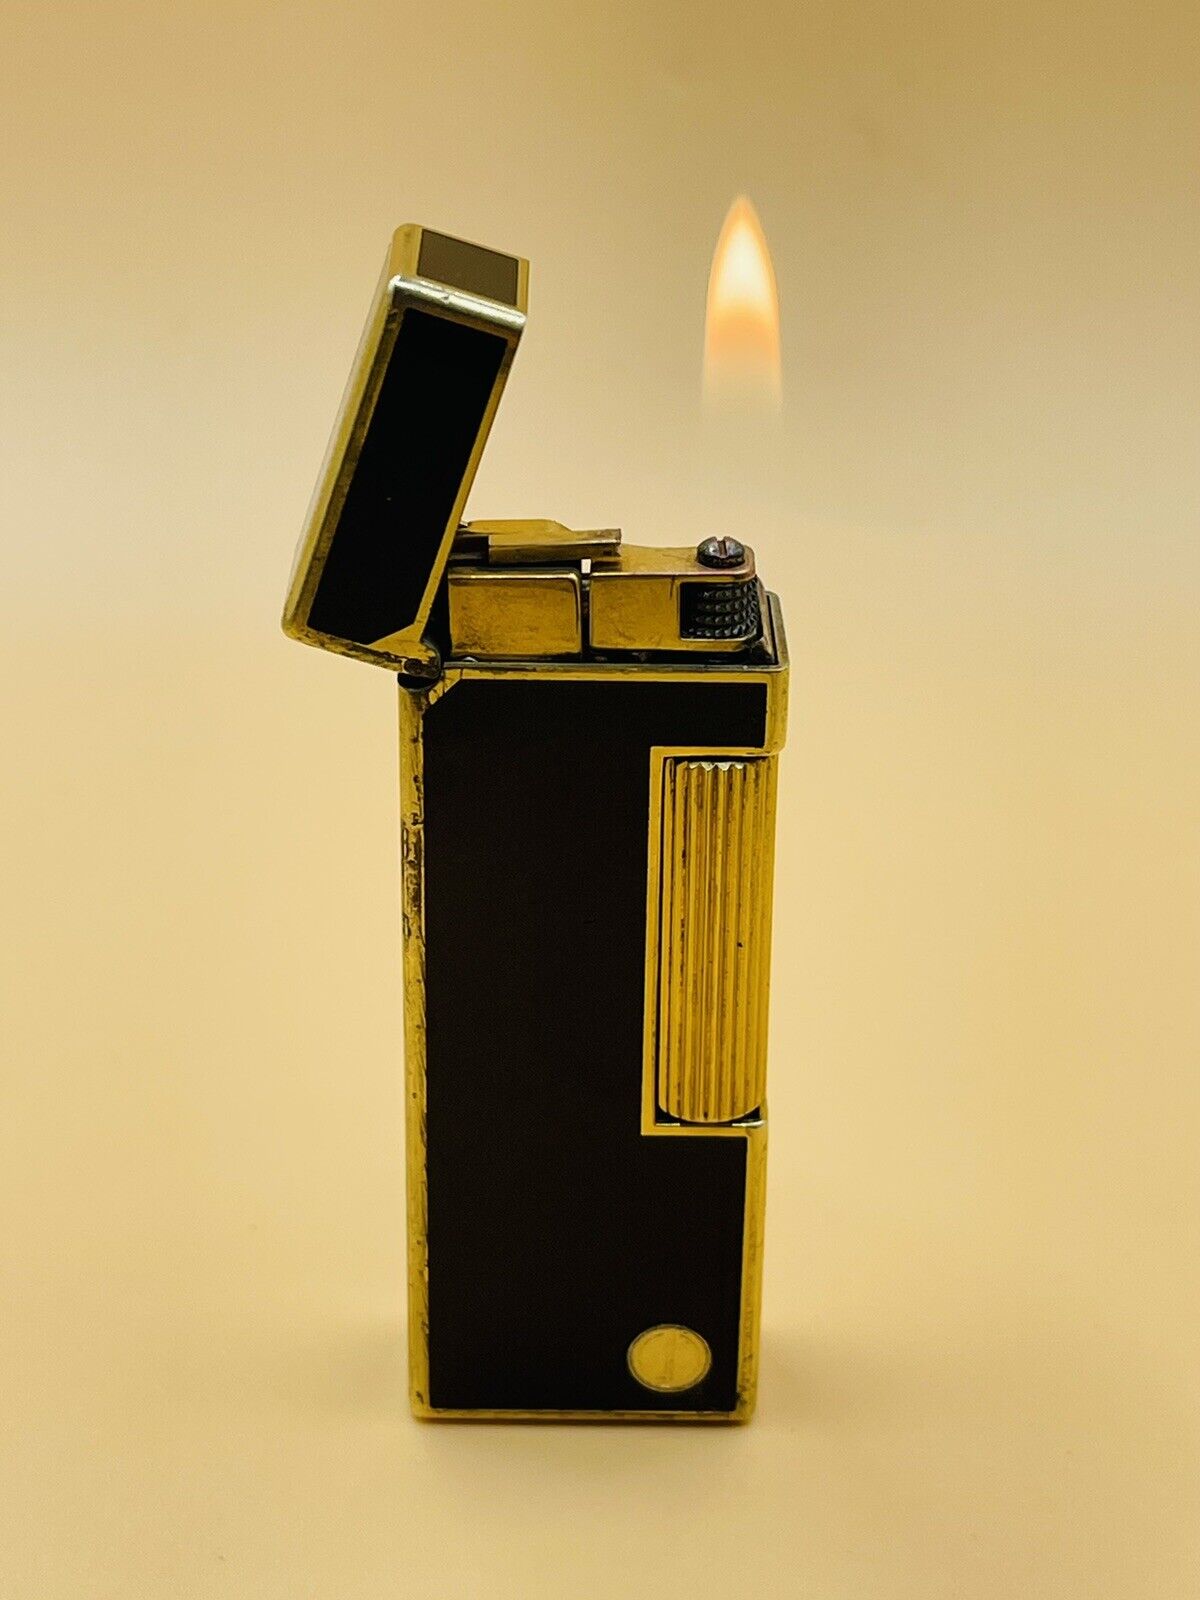 Dunhill rollagas lighter-black lacquer gold trim great working condition